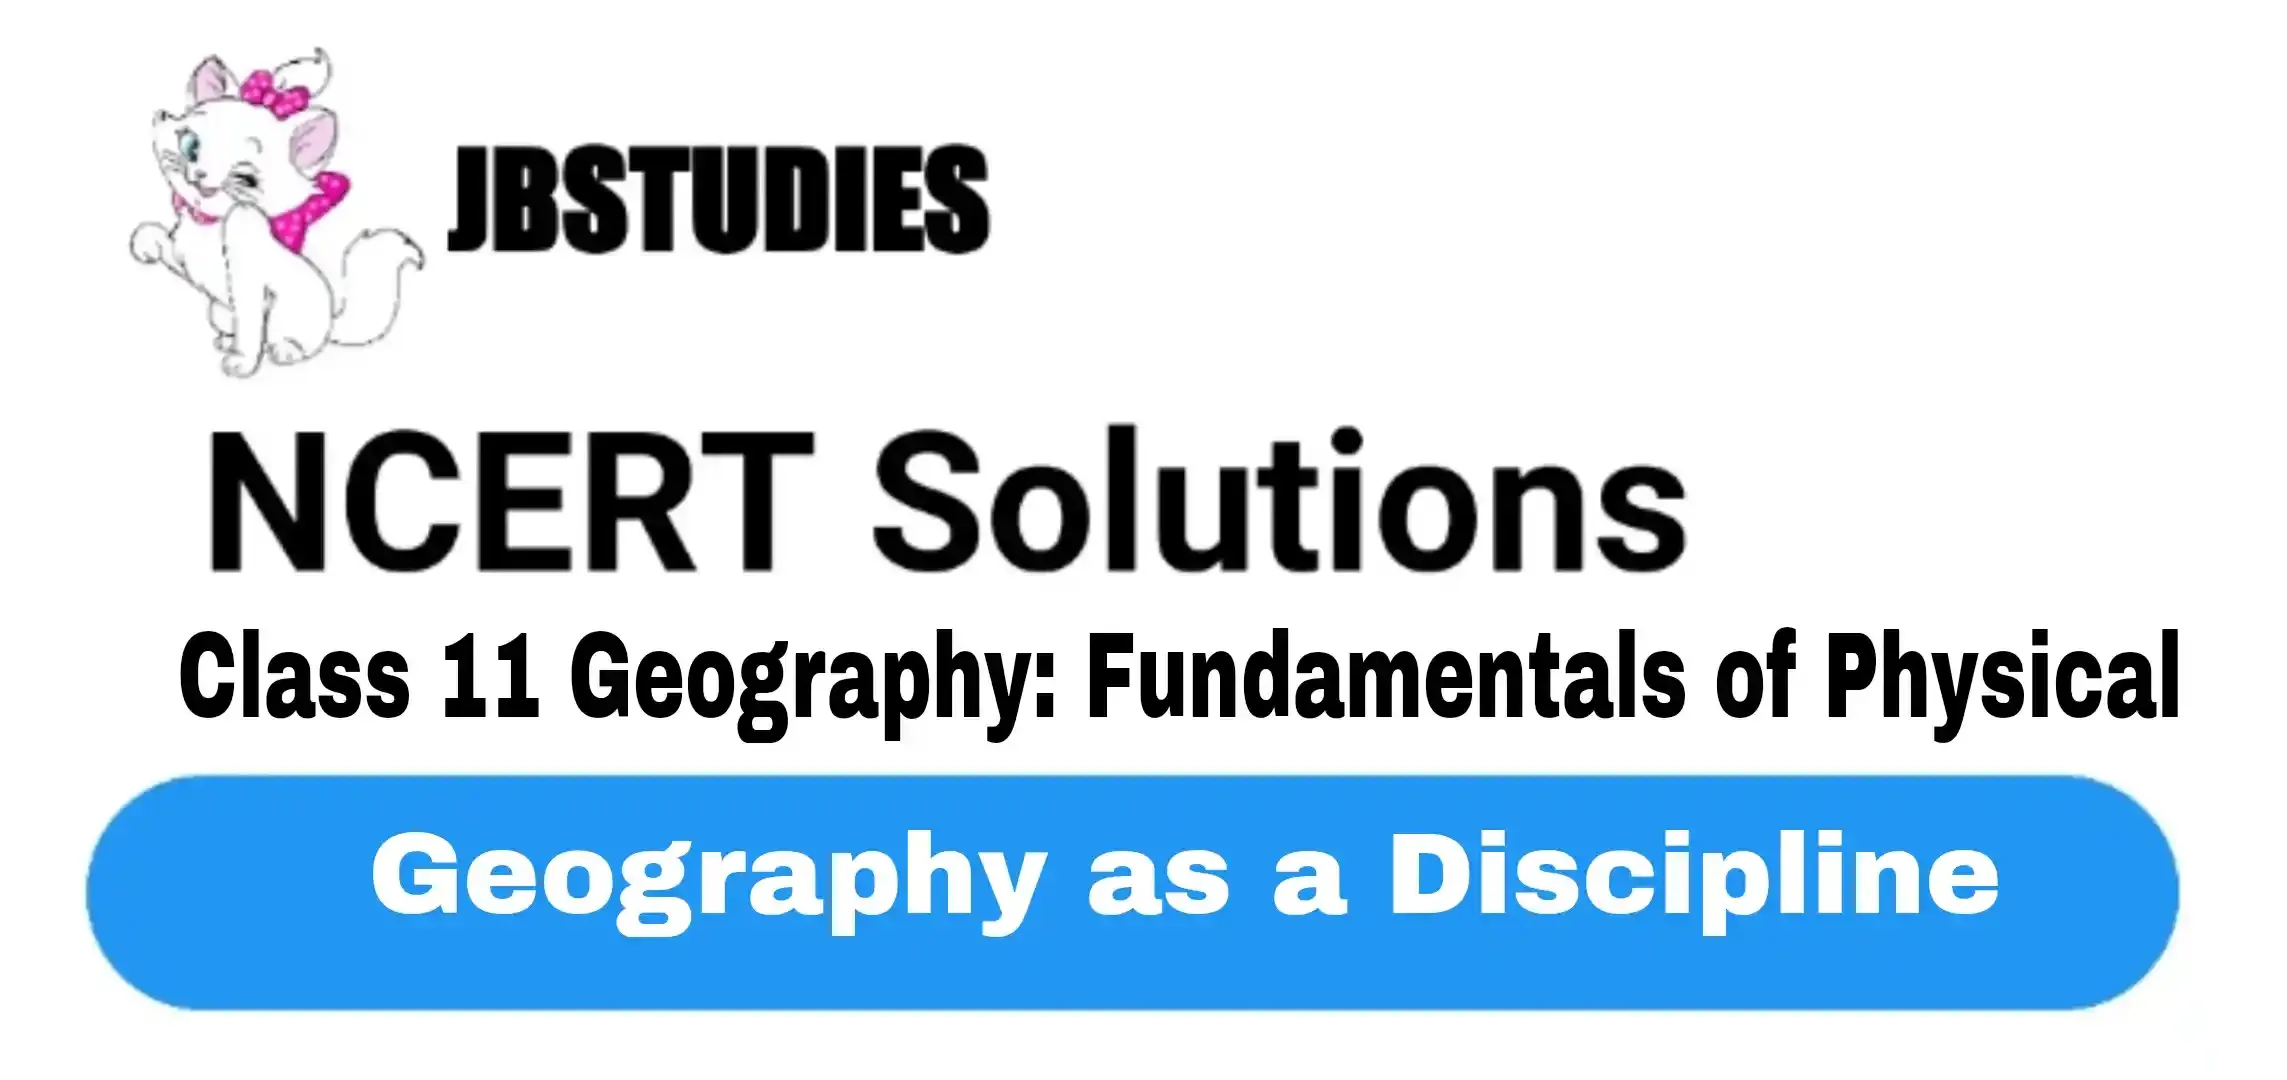 Solutions Class 11 Geography Chapter-1 Geography as a Discipline